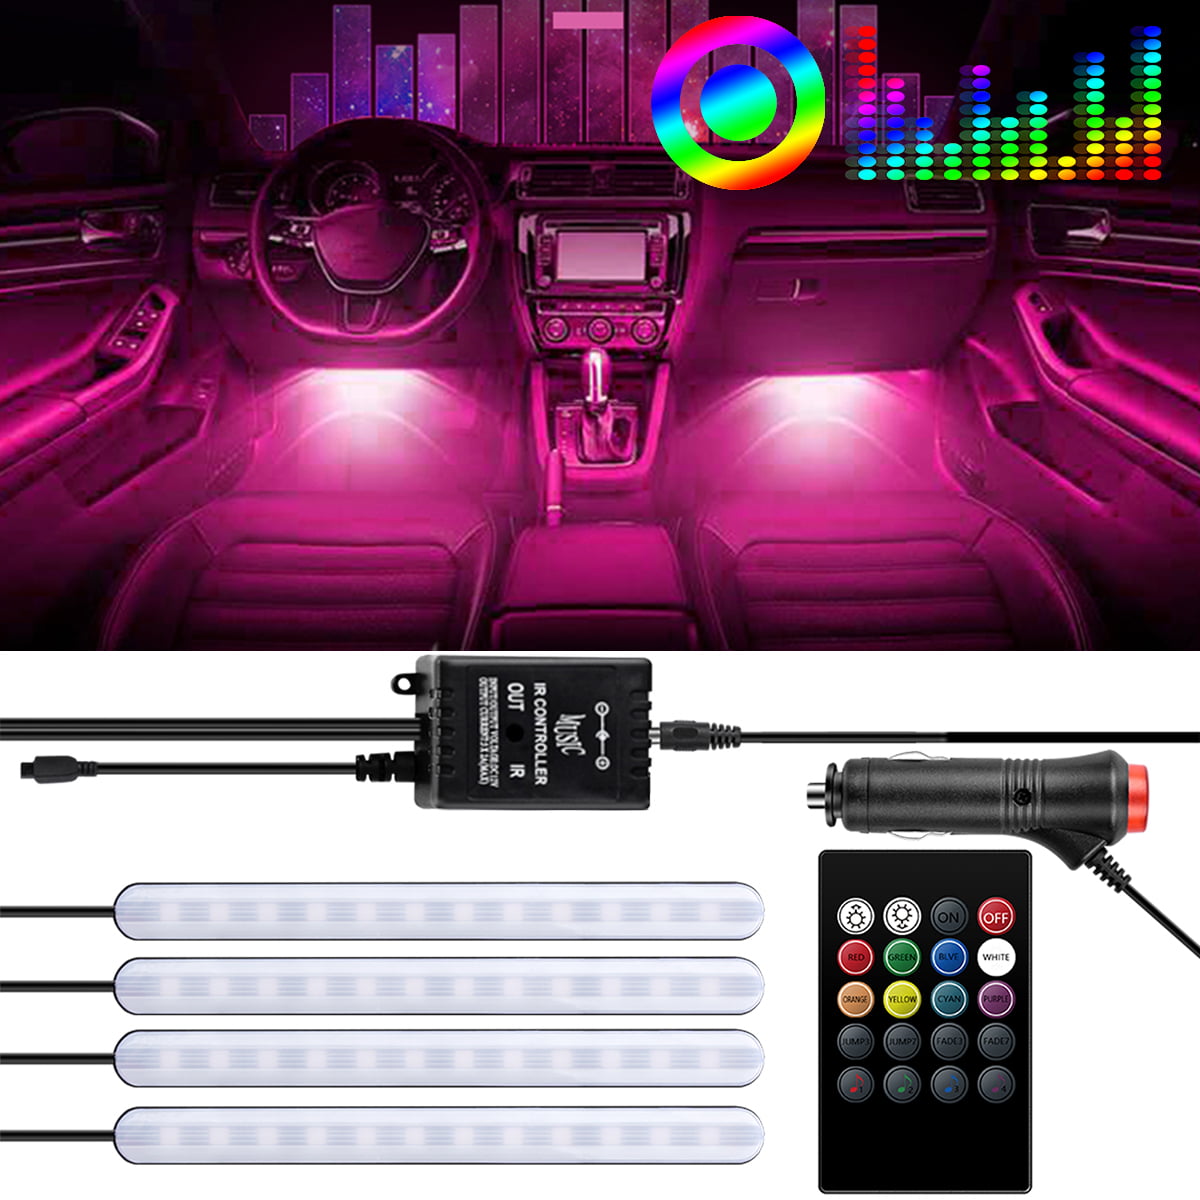 Car Charger Included Controller Led Lights for Cars Led Interior Car Lights Waterproof Multicolor Music Underglow Lighting Kits with Wireless Control and Sound Active Function DC 12V 